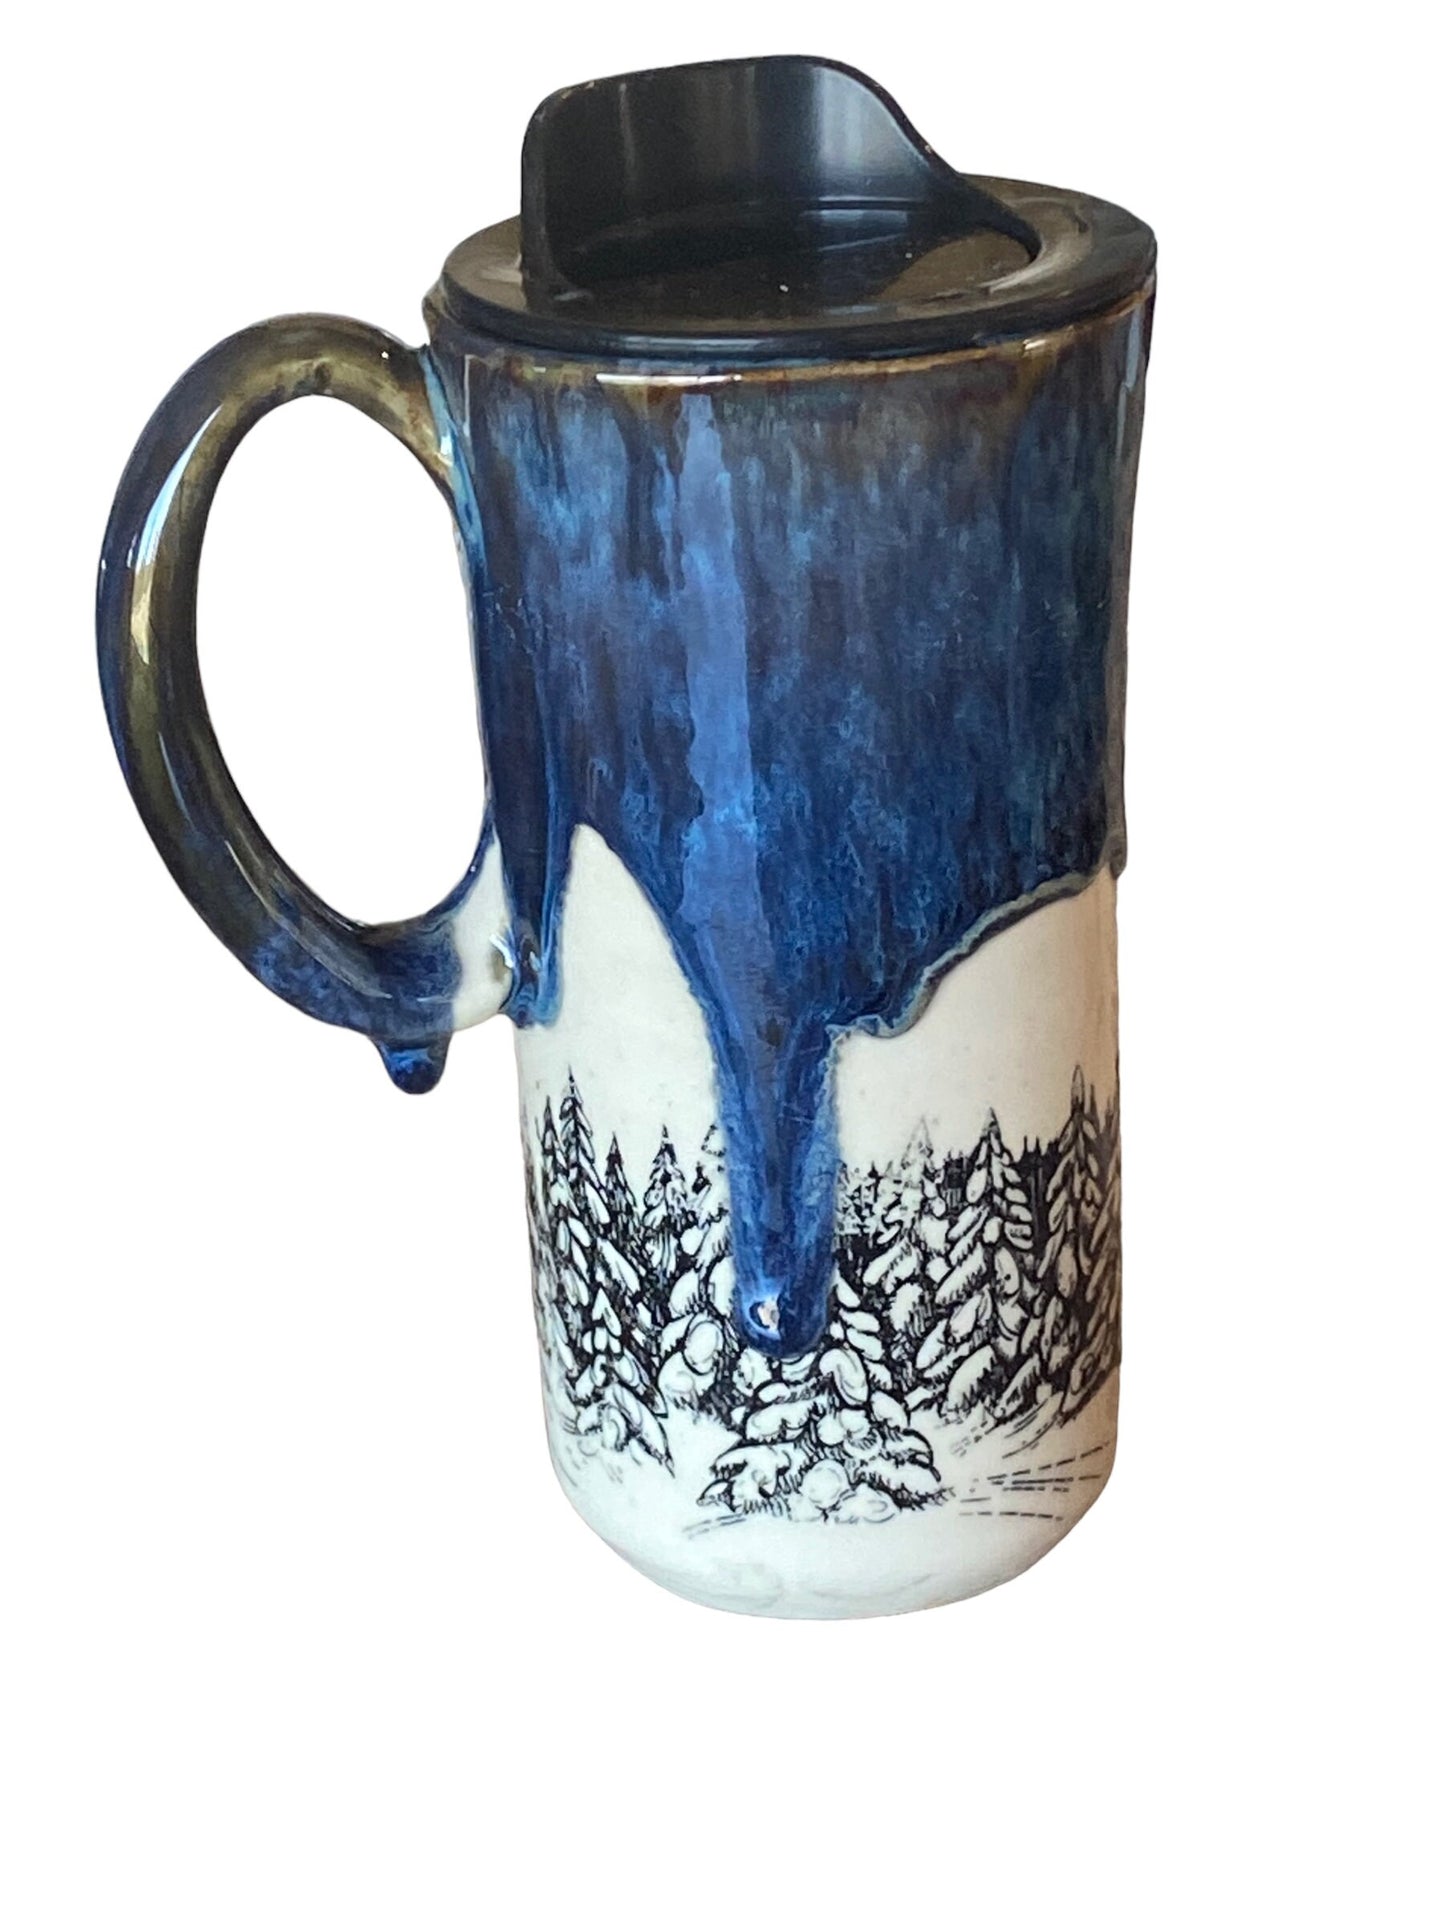 Large Travel Mug with Locking Lid Embellished with Pine Trees - Stylish and Secure Pottery for Nature-Loving Adventures